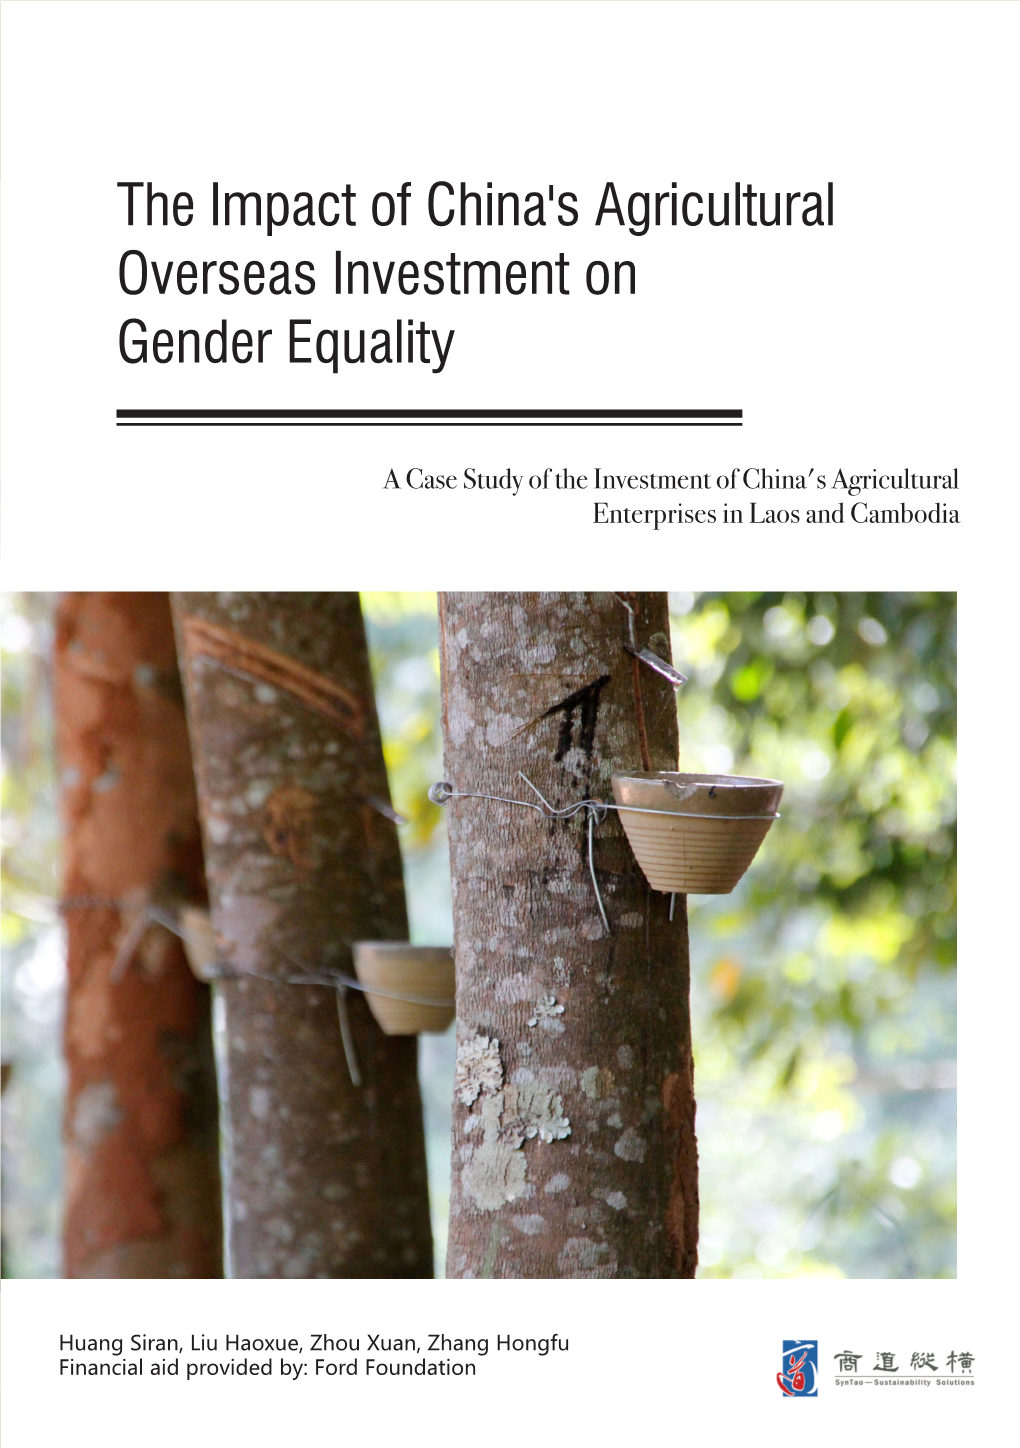 The Impact of China's Agricultural Overseas Investment on Gender Equality